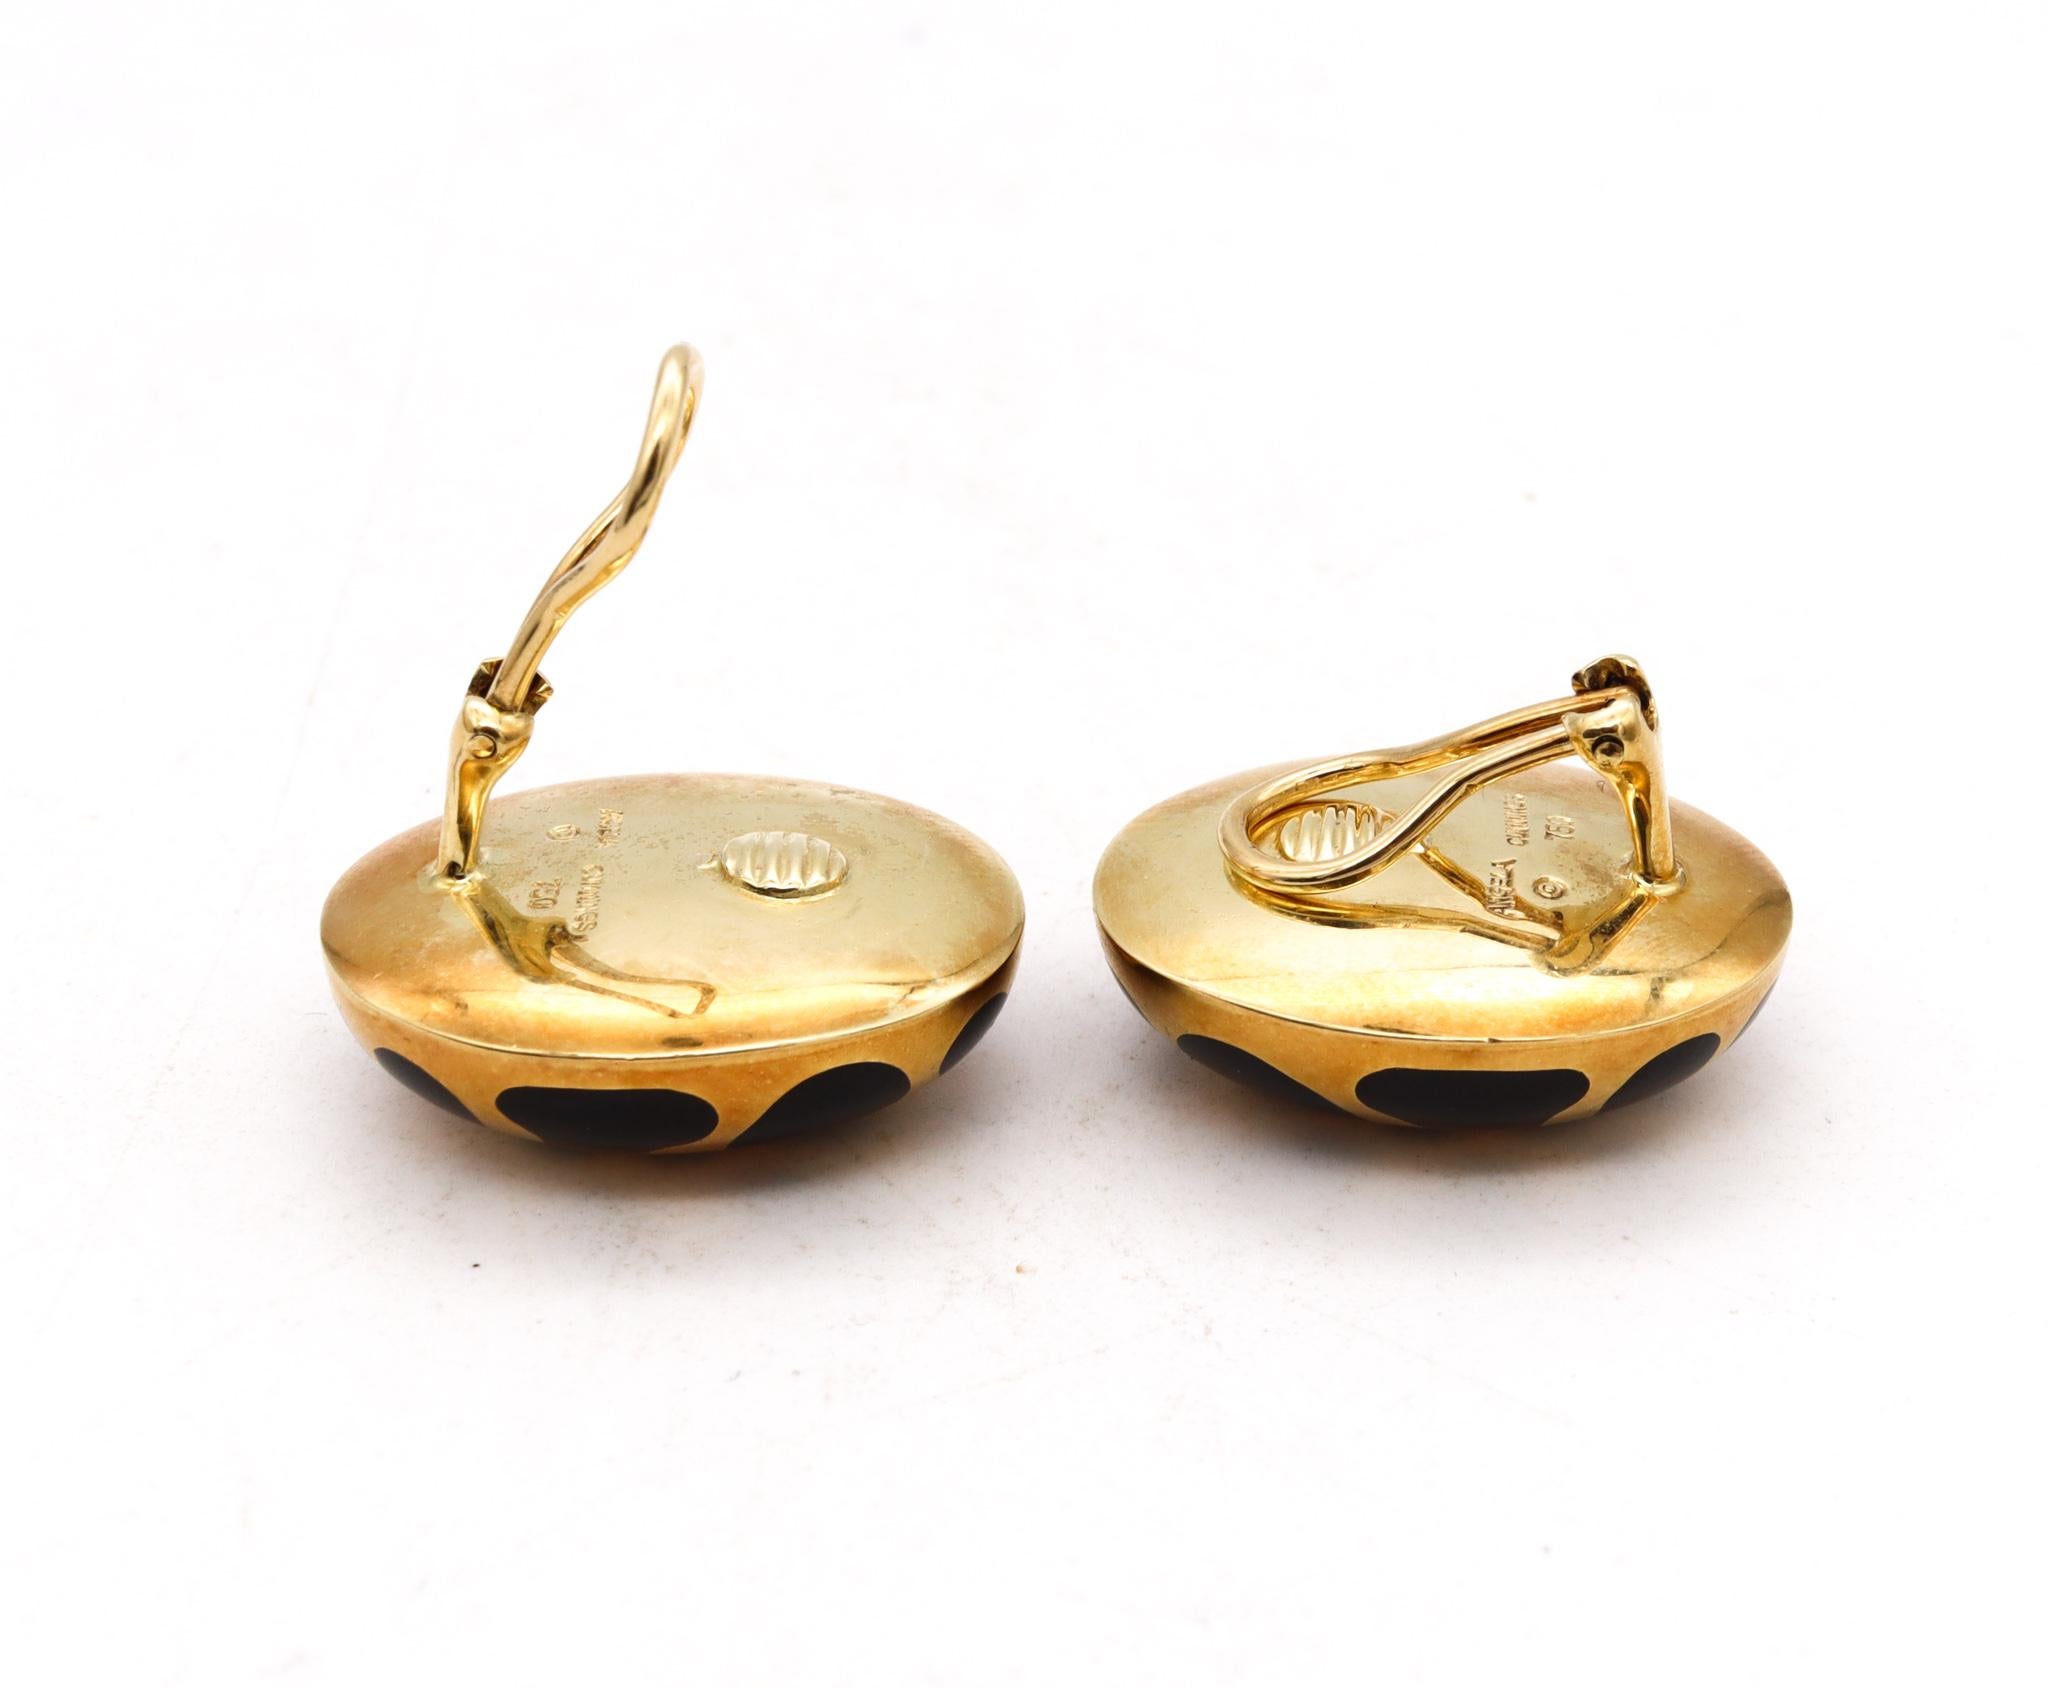 Cabochon Angela Cummings Allure Clips-On Earrings In 18Kt Gold With Black Jade Inlaid For Sale